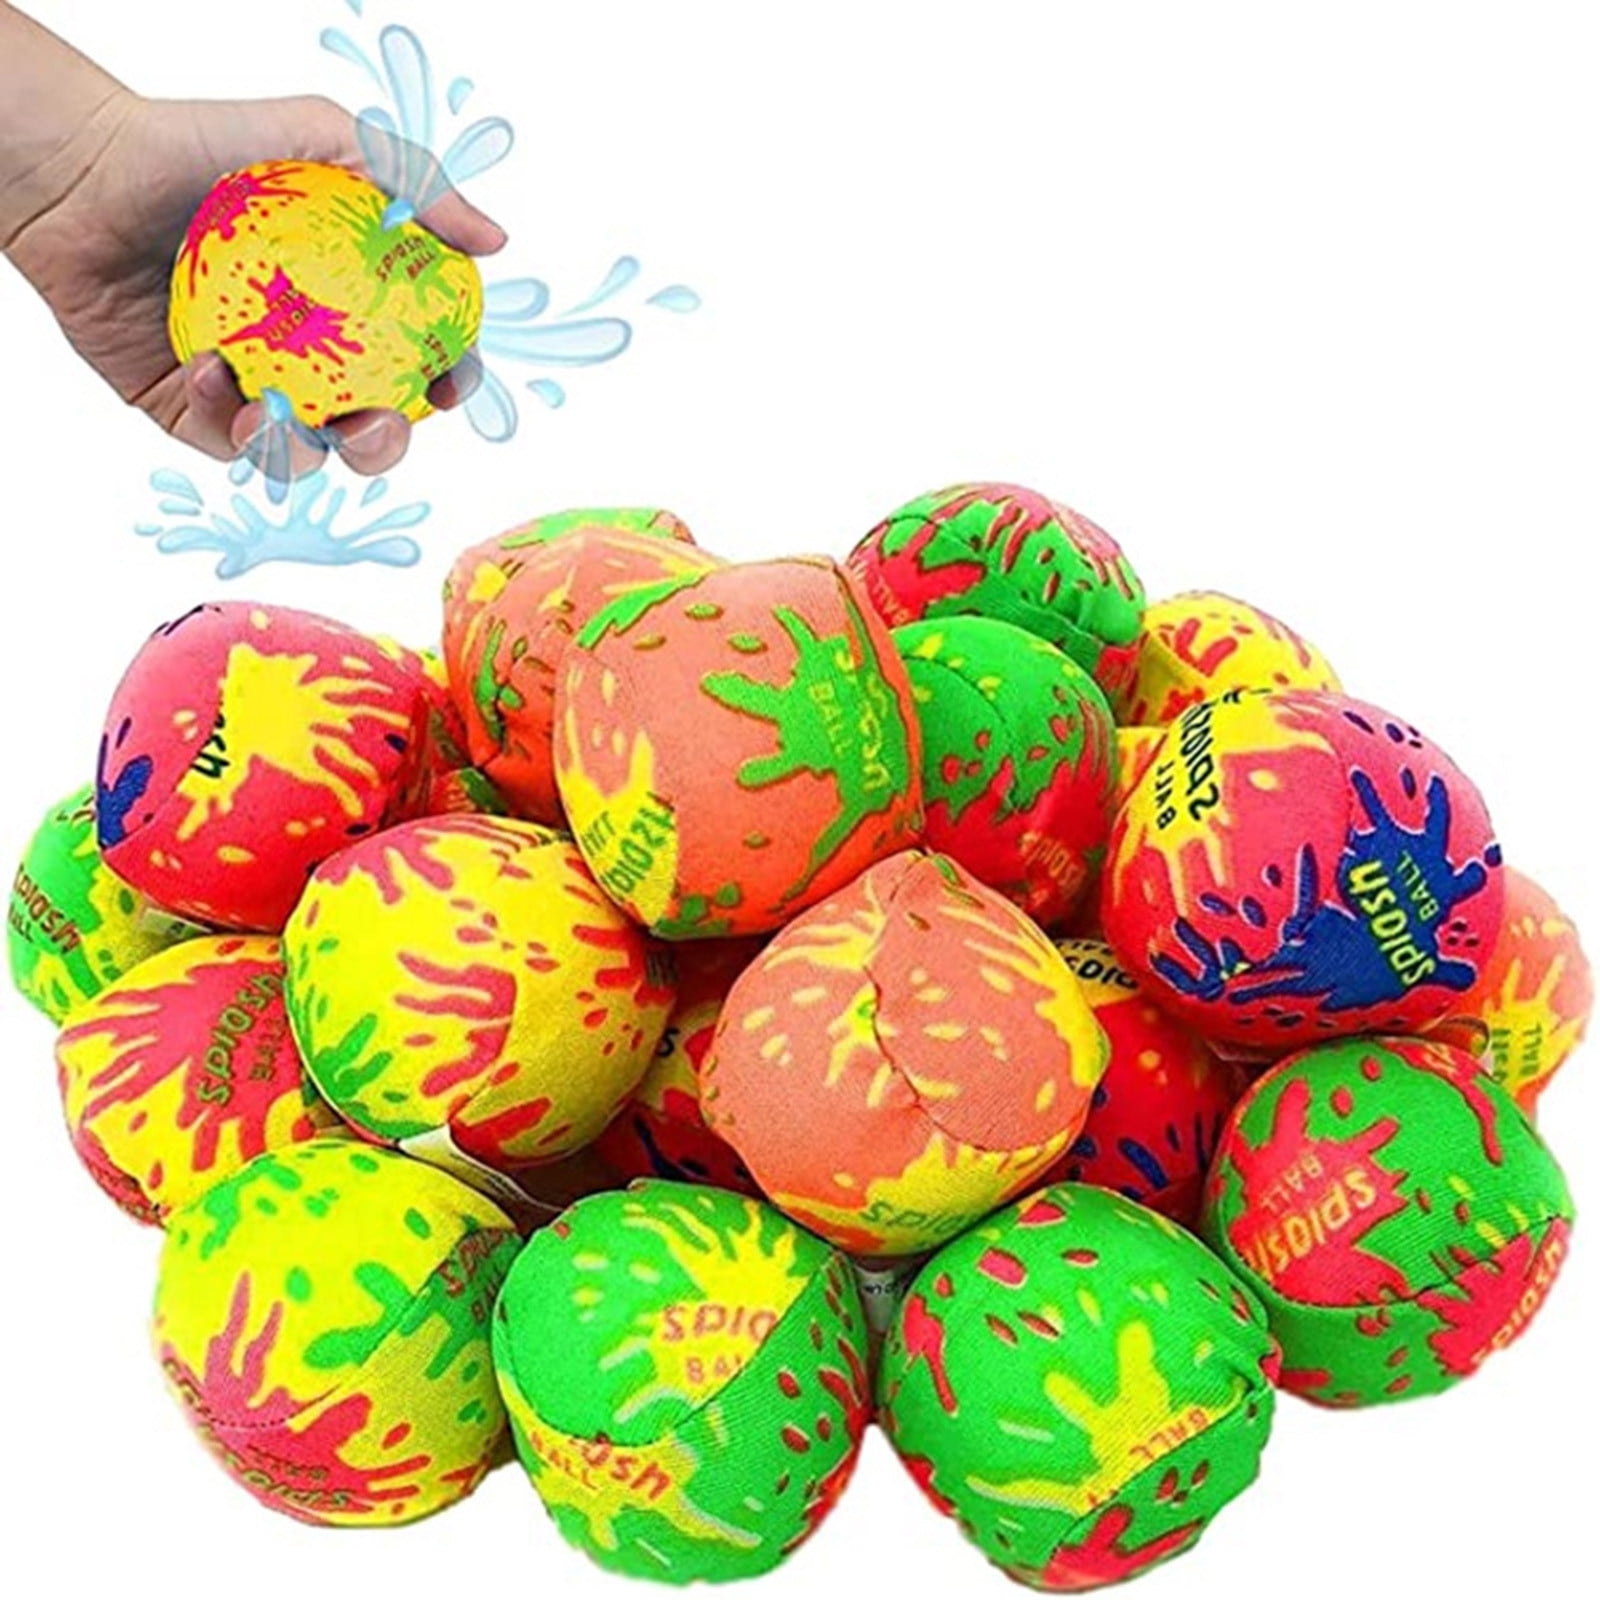 12pc Neon Multi-Color Water Splash Bomb Balls Summer Party Pool Beach Toy 